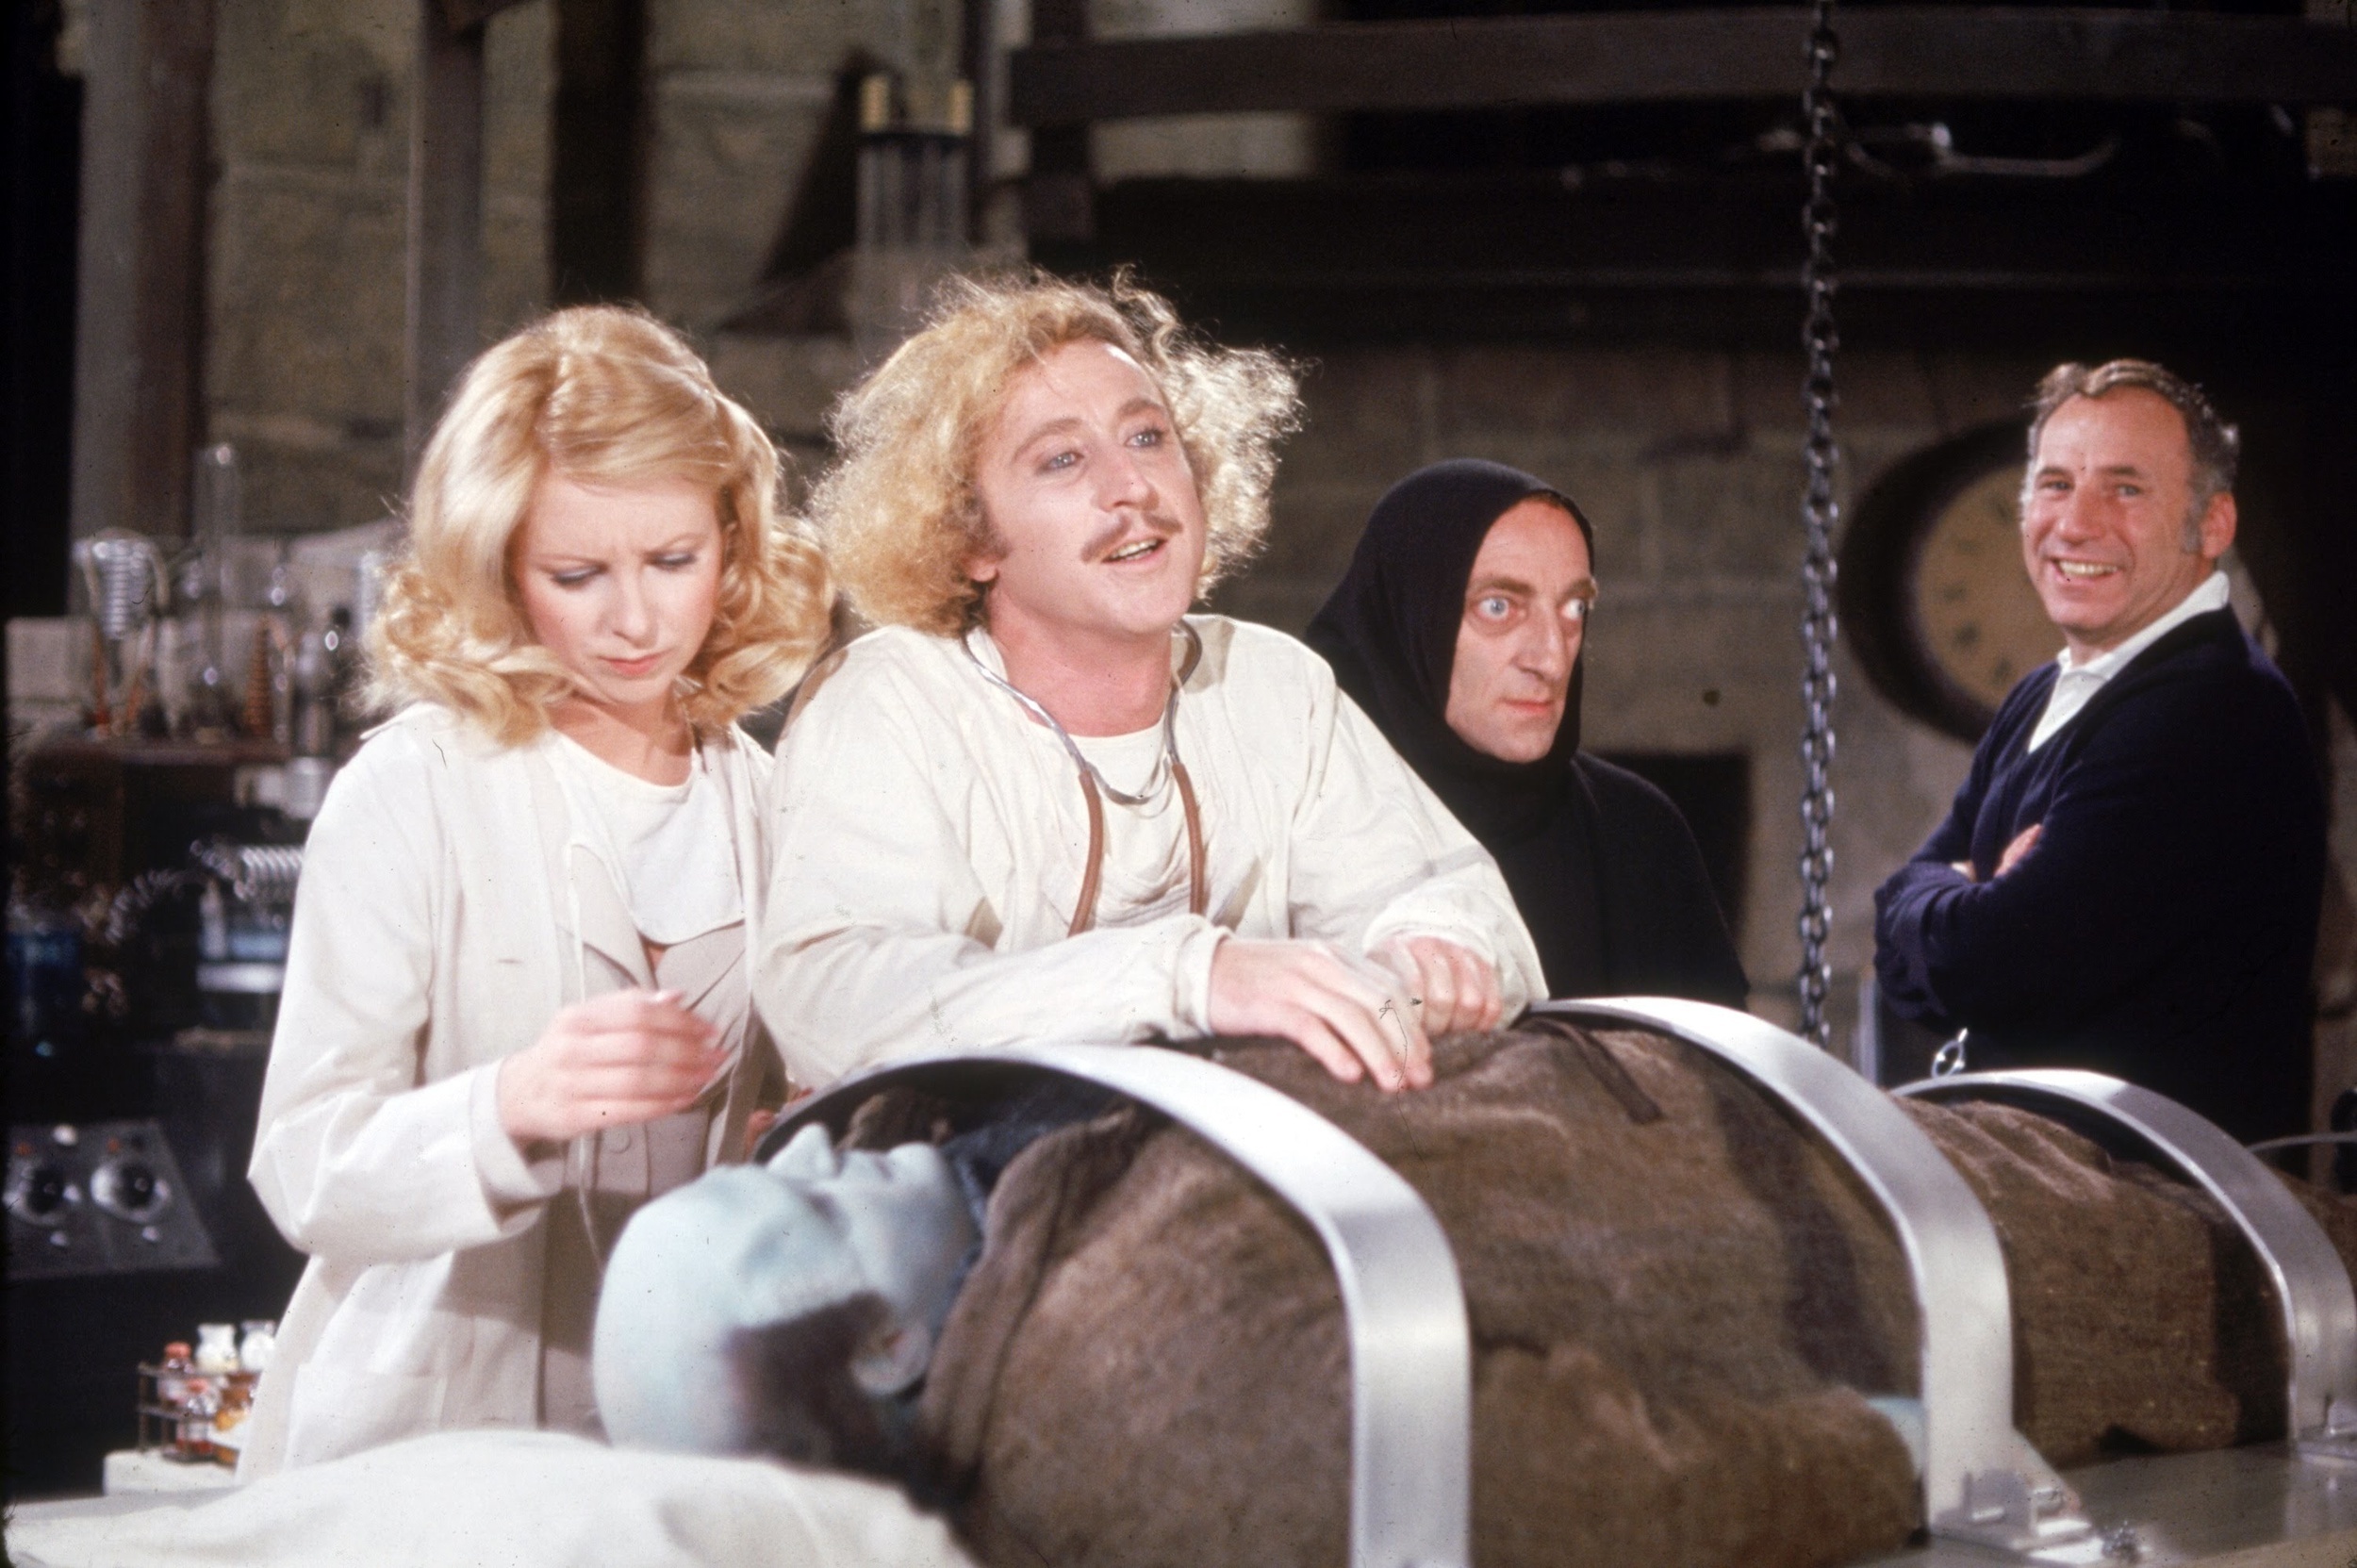 <p>Parody comedies don’t tend to do much at the Academy Awards. However, <em>Young Frankenstein</em> managed to find success where others had not. The film was nominated for two Oscars. One was for Best Sound. The other went to Brooks and Wilder for Best Adapted Screenplay.</p><p>You may also like: <a href='https://www.yardbarker.com/entertainment/articles/the_25_top_selling_rock_albums_of_all_time_040524/s1__39121793'>The 25 top-selling rock albums of all time</a></p>